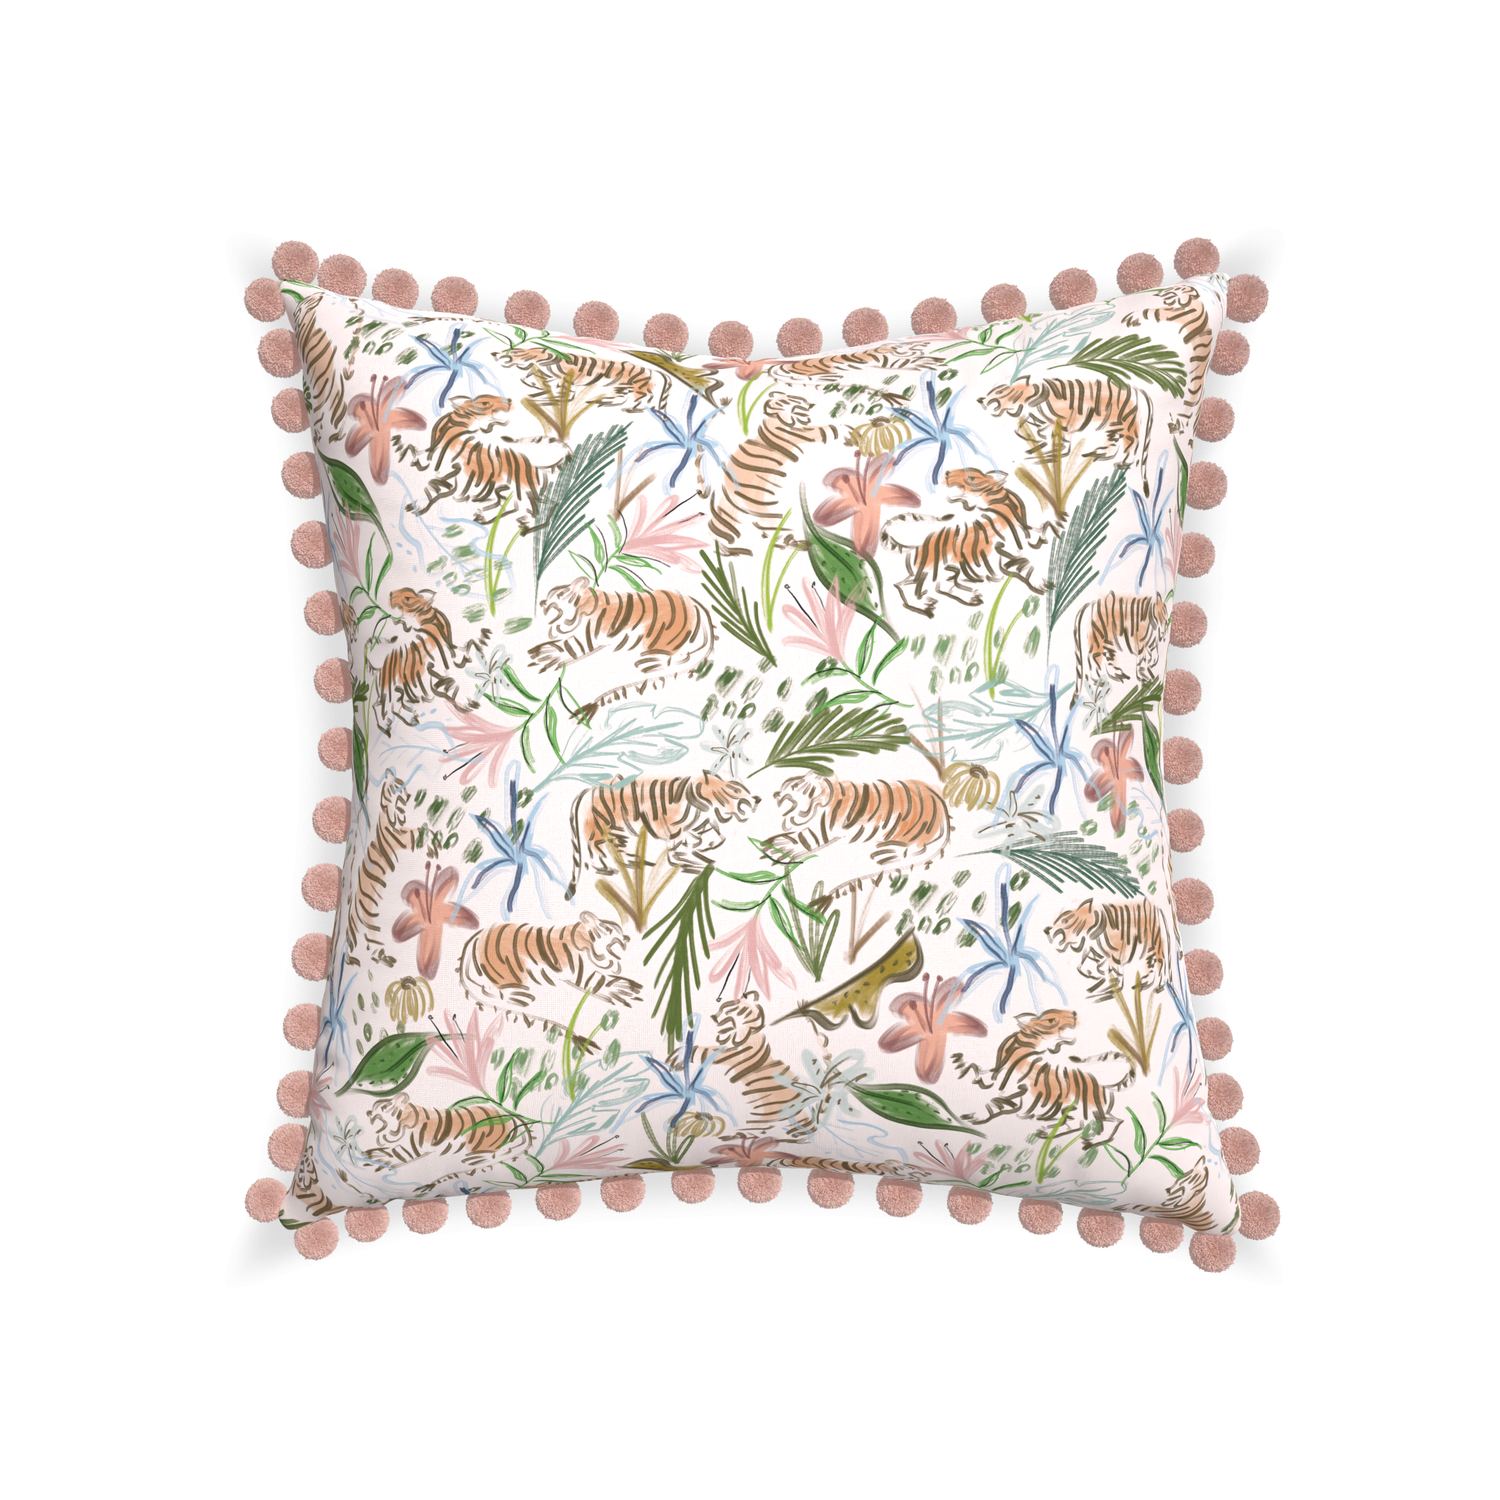 22-square frida pink custom pink chinoiserie tigerpillow with rose pom pom on white background